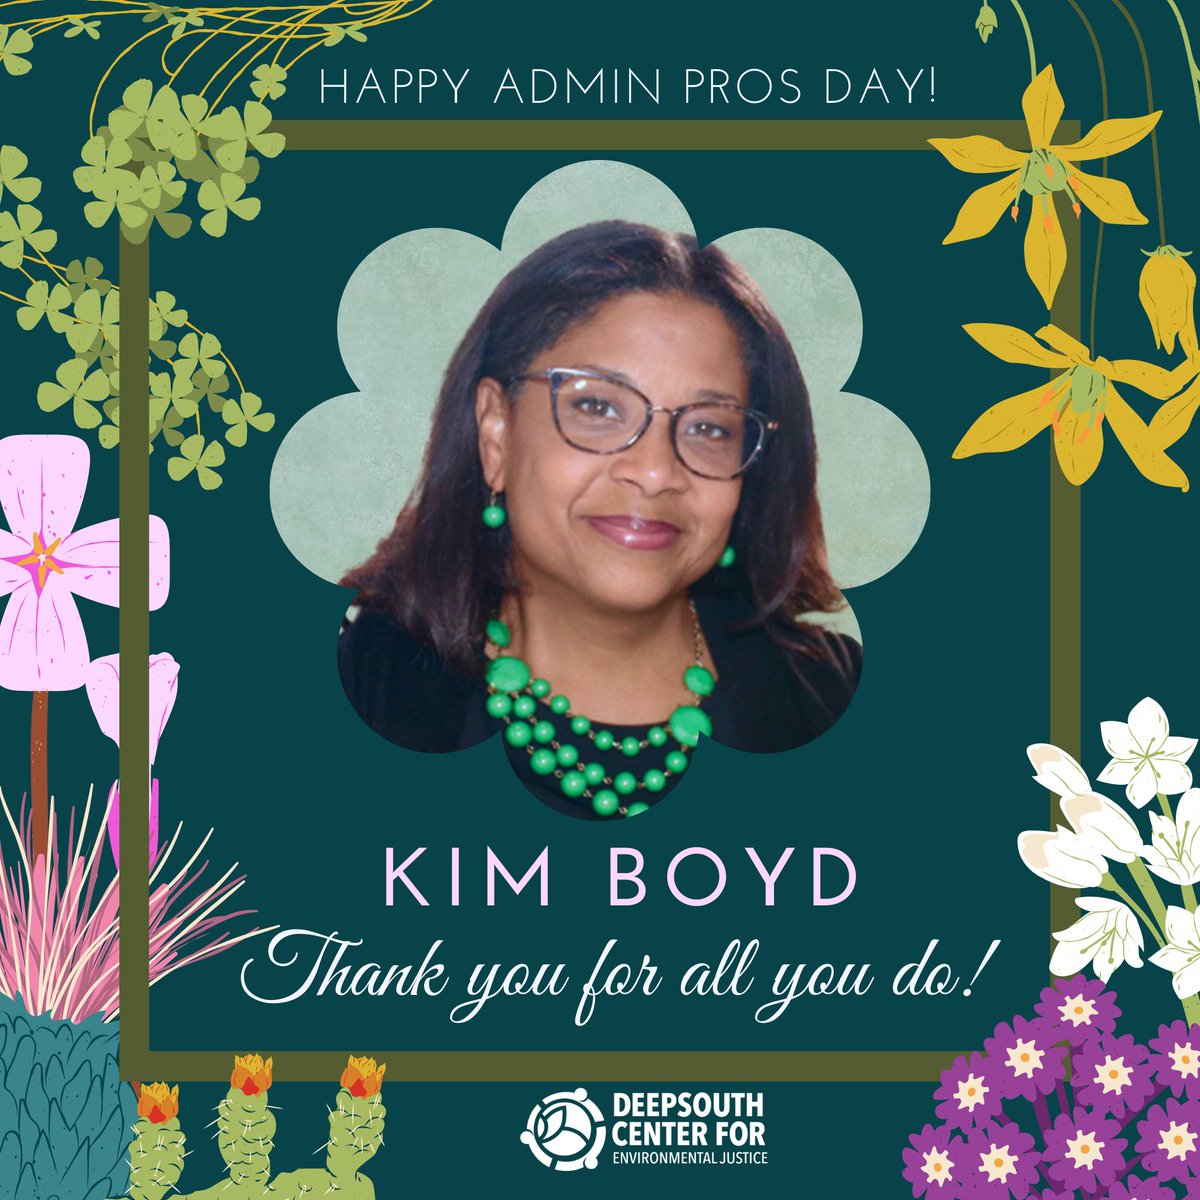 Happy #AdminProfessionalsDay! 🎉 to the incredible Kim Boyd! Your dedication, efficiency, and grace keep things running smoothly. Thank you for all you do! ✨#AdminProDay #ThankYou